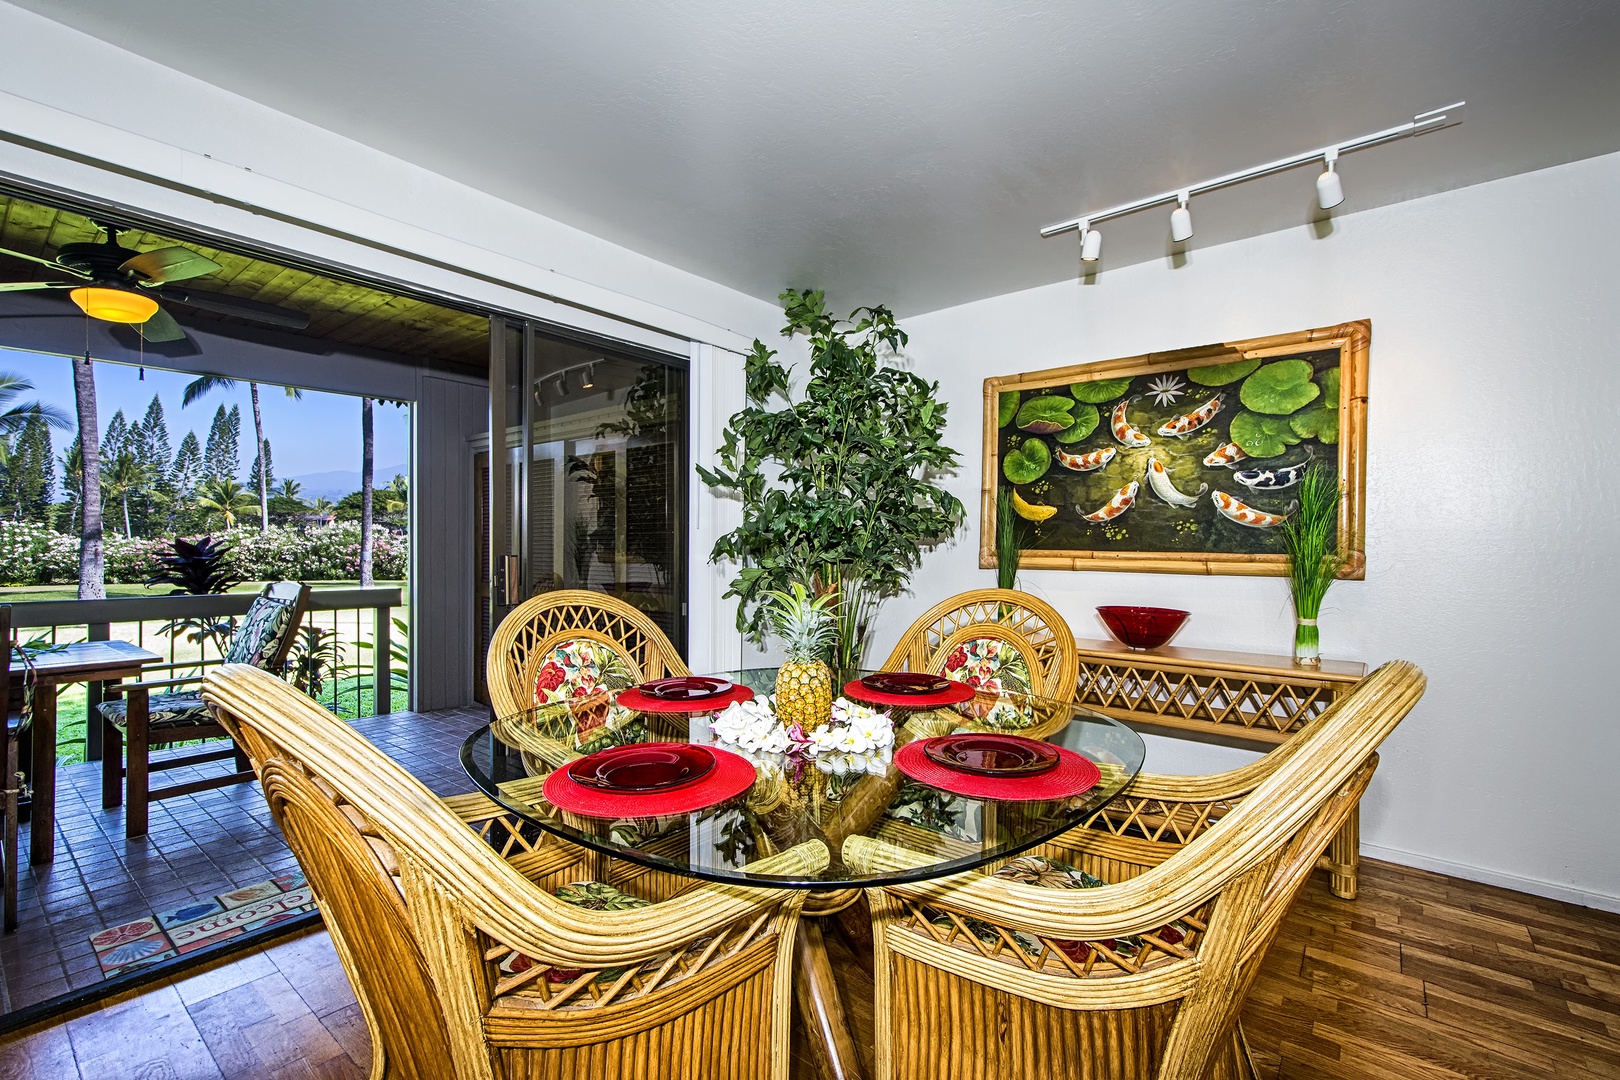 Kailua Kona Vacation Rentals, Kanaloa 701 - Beautifully furnished in a tropical theme with air conditioning throughout